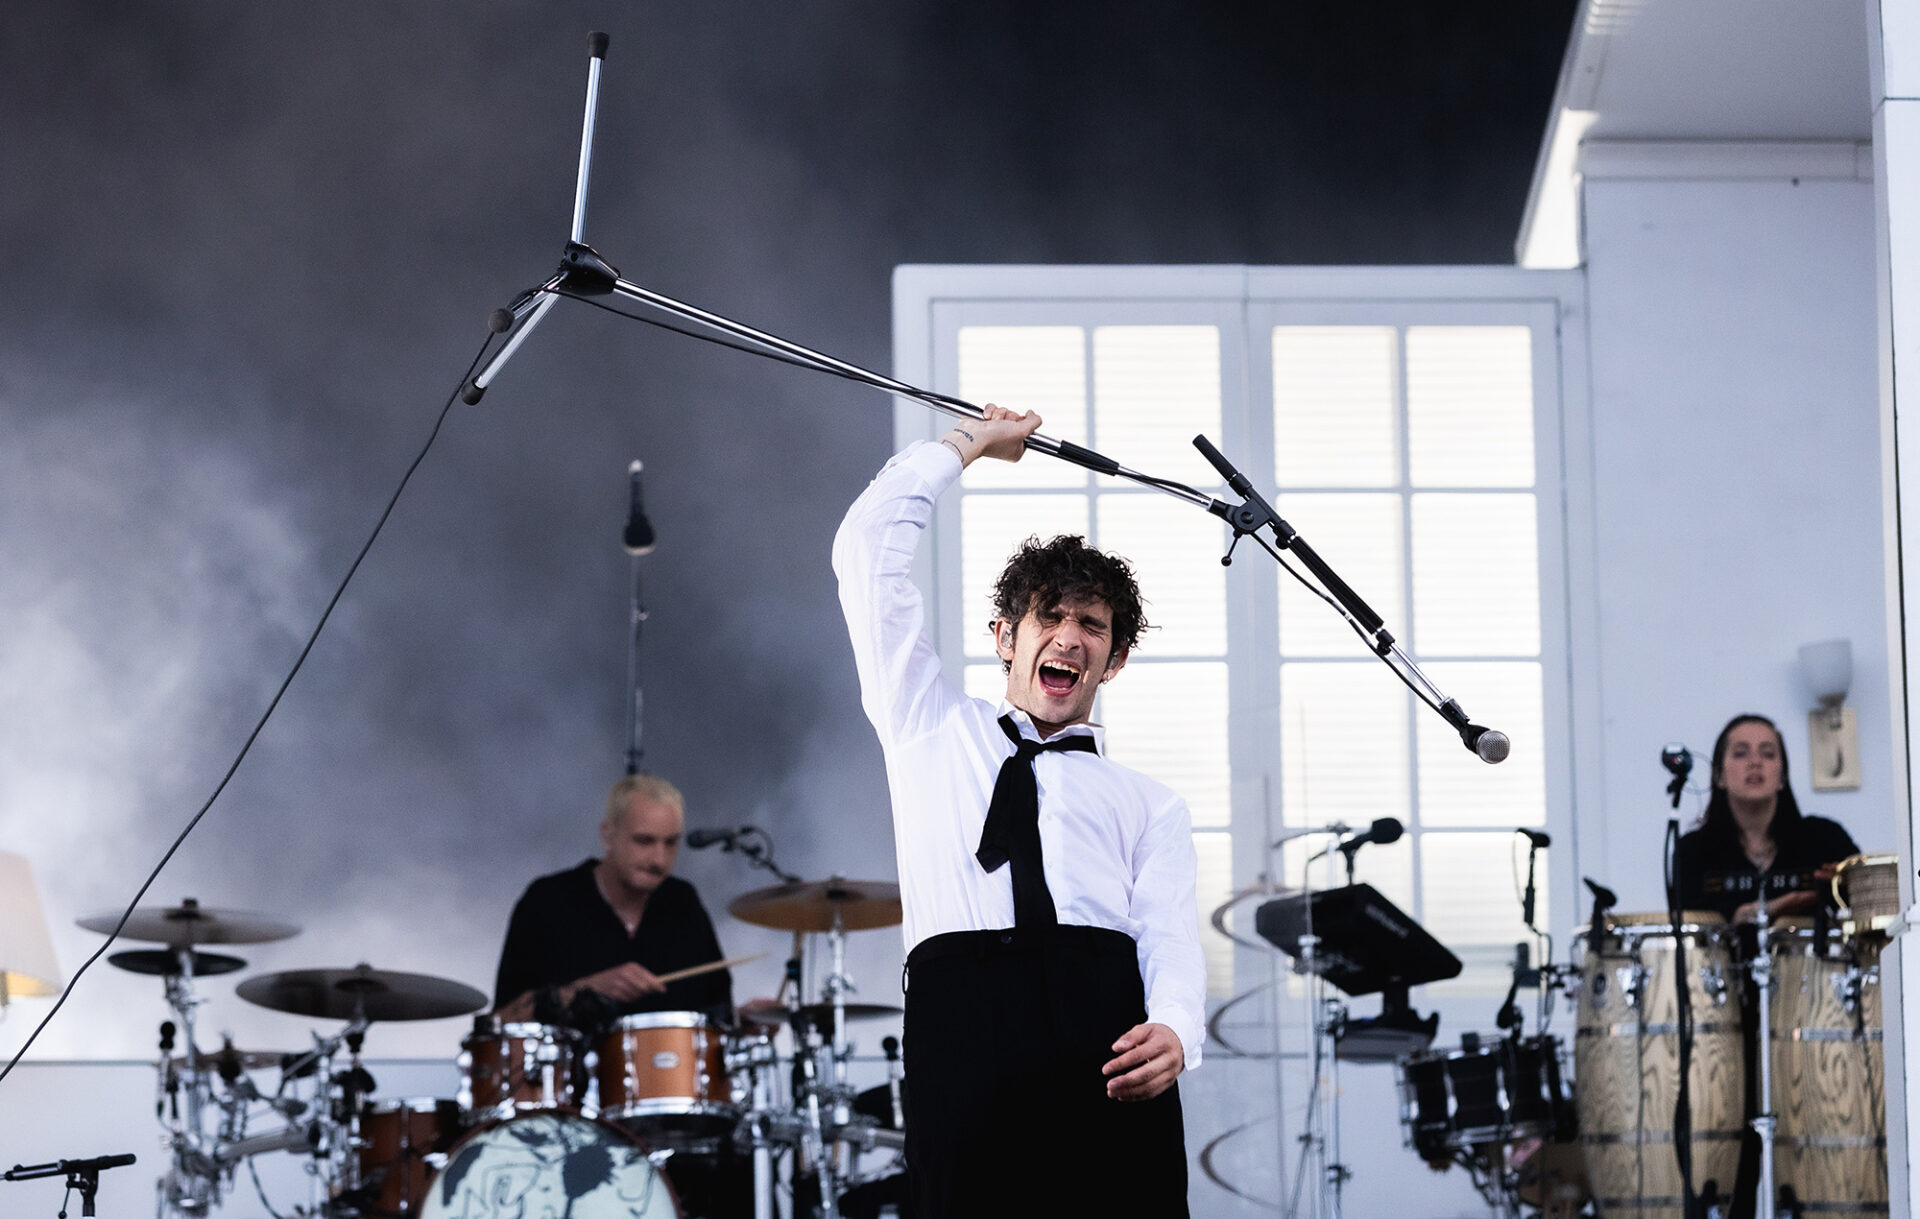 Check out our exclusive photos of The 1975's Finsbury Park show